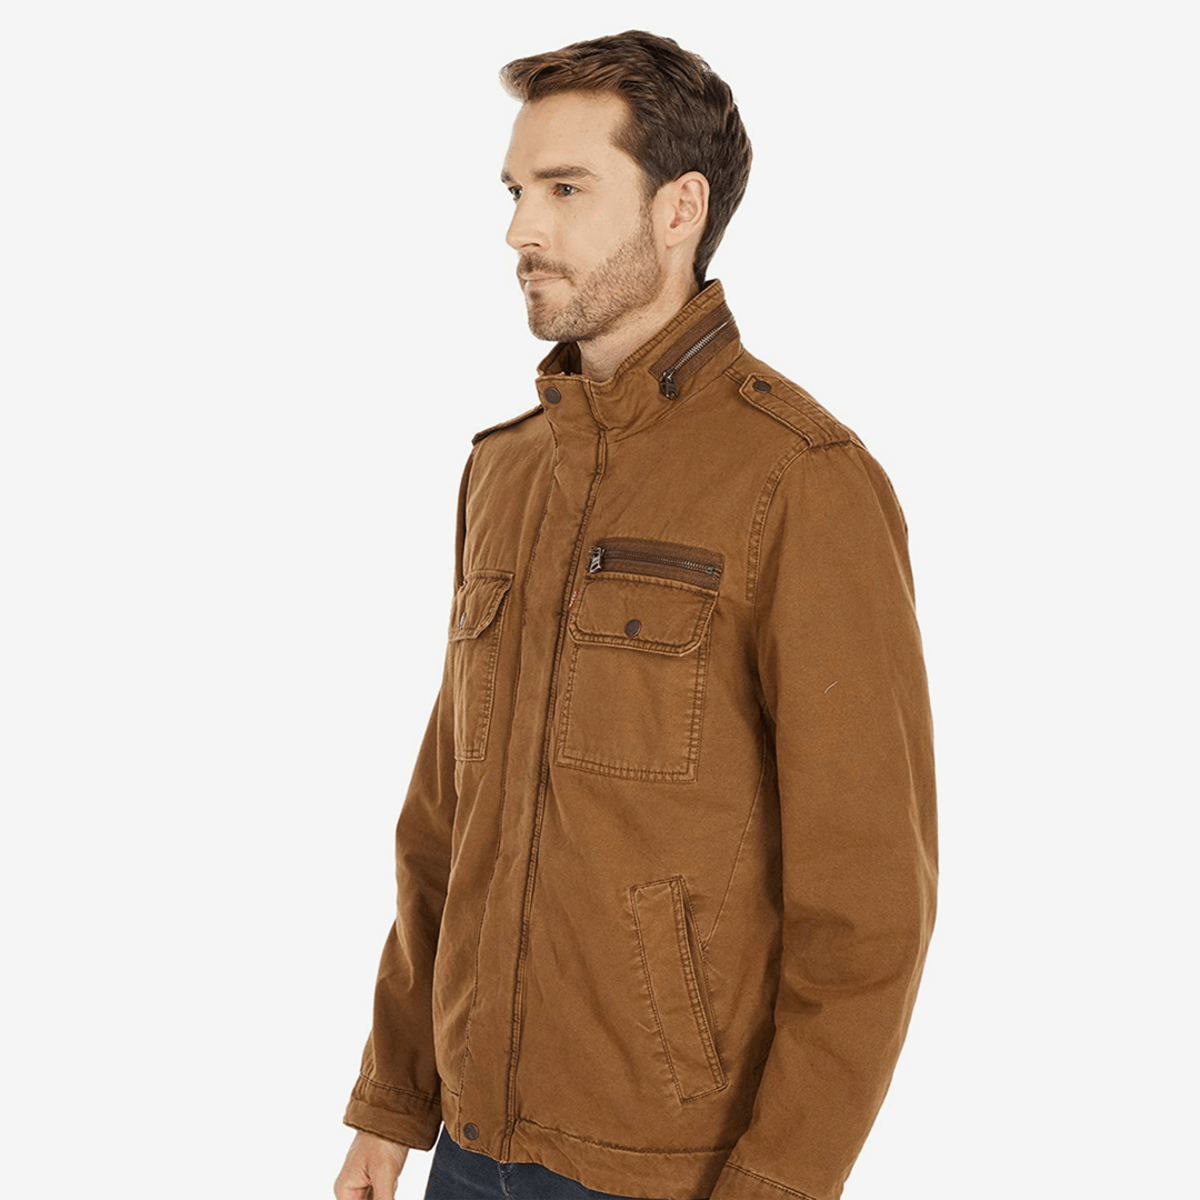 Bundle Up This Fall With The Levi's® Two-Pocket Military Jacket - Men's  Journal